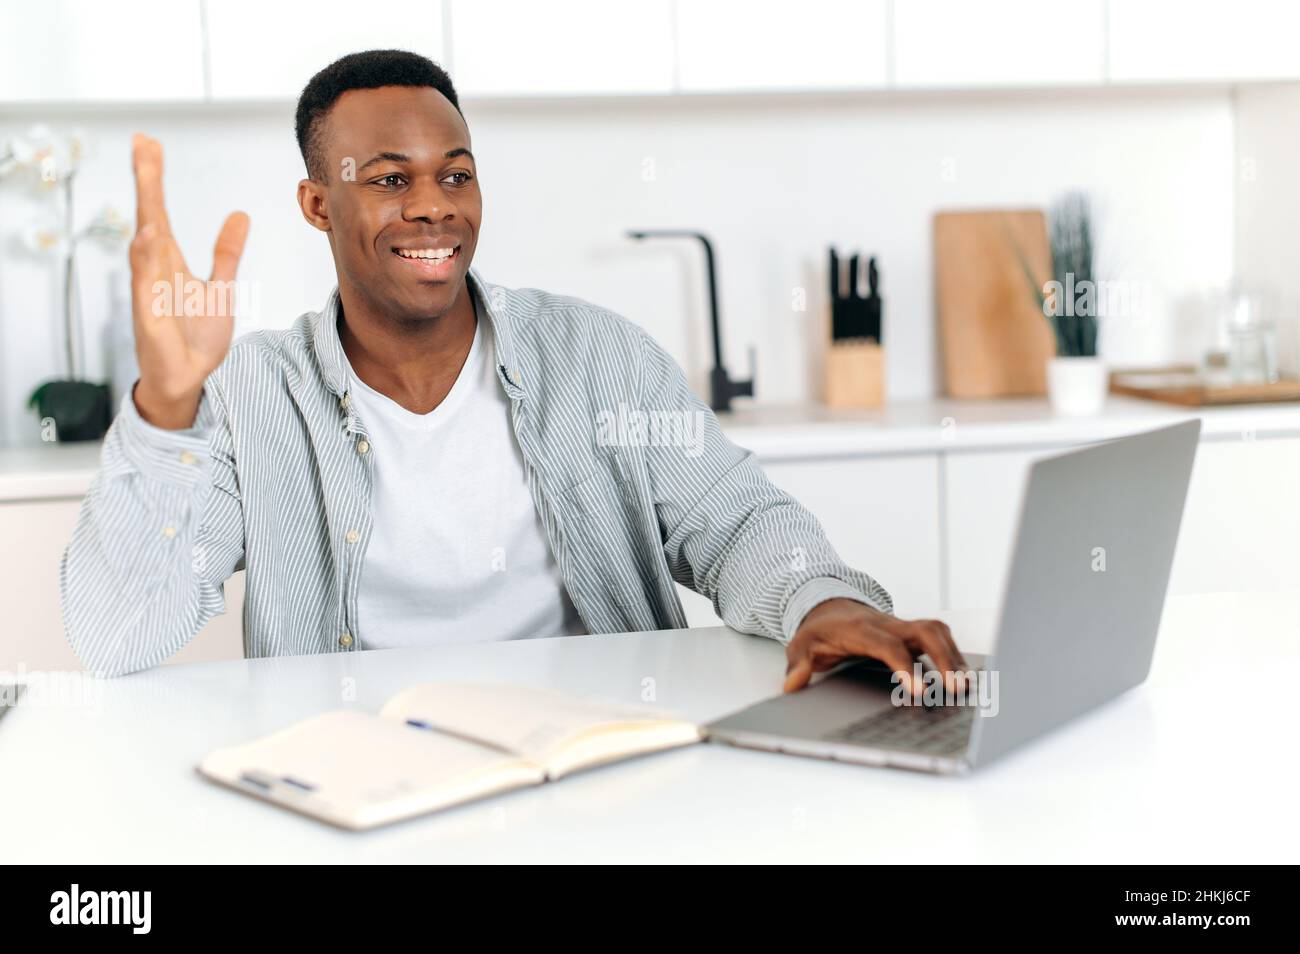 Successful modern young african american man, freelancer, designer or IT specialist, work from home, using a laptop to communicate with colleagues or clients, smiling friendly. Distant communication Stock Photo